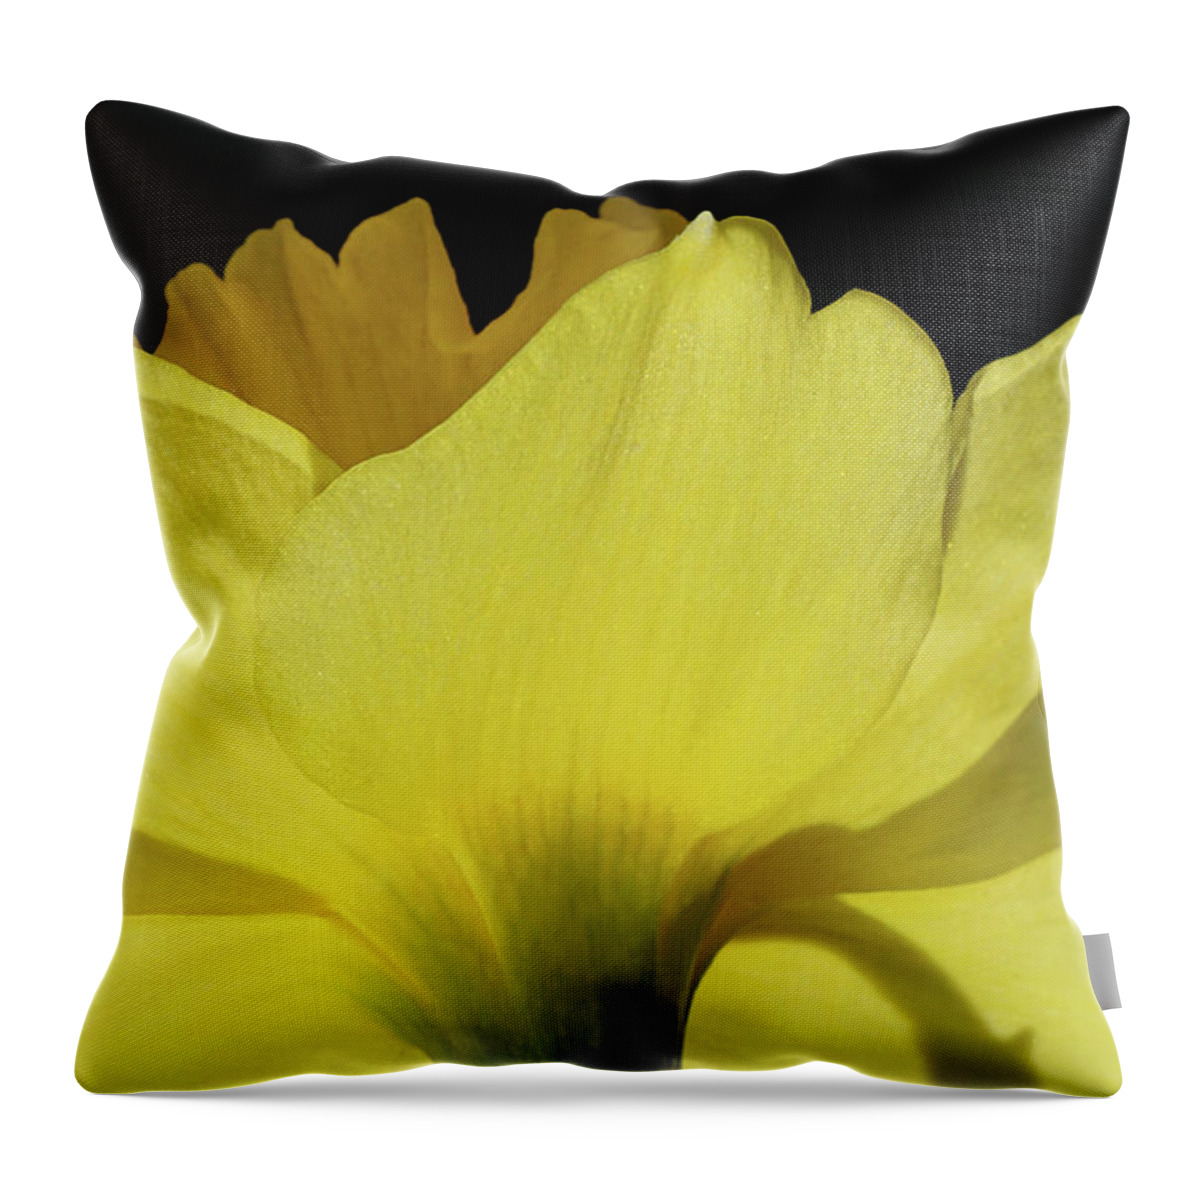 Yellow Throw Pillow featuring the photograph Sun's Energy by Kathi Mirto